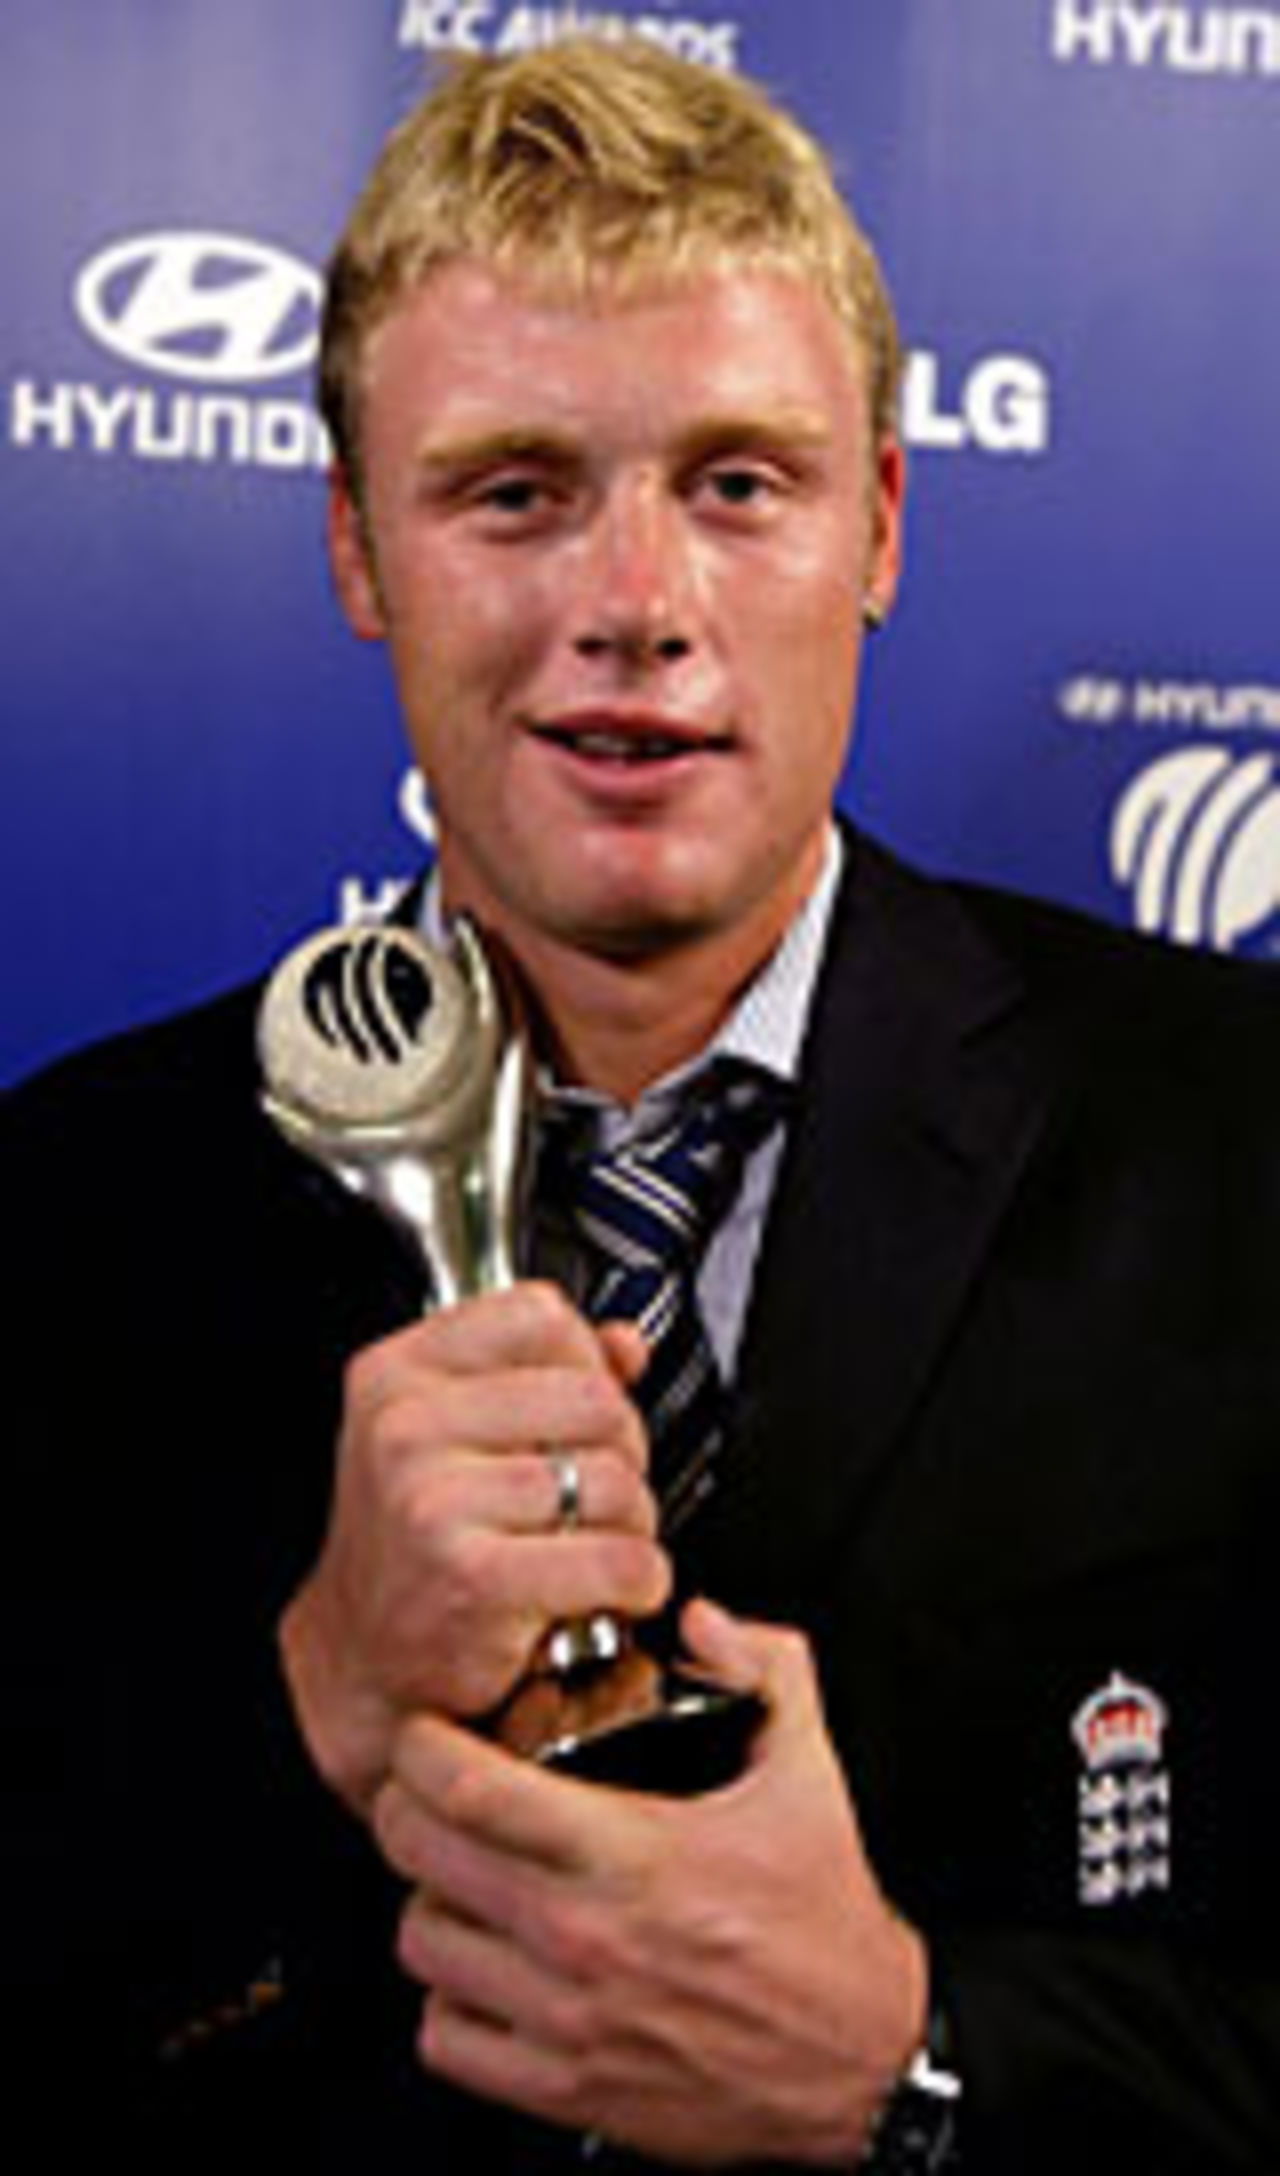 Andrew Flintoff with the One-Day Player of the Year award, London, September 7, 2004